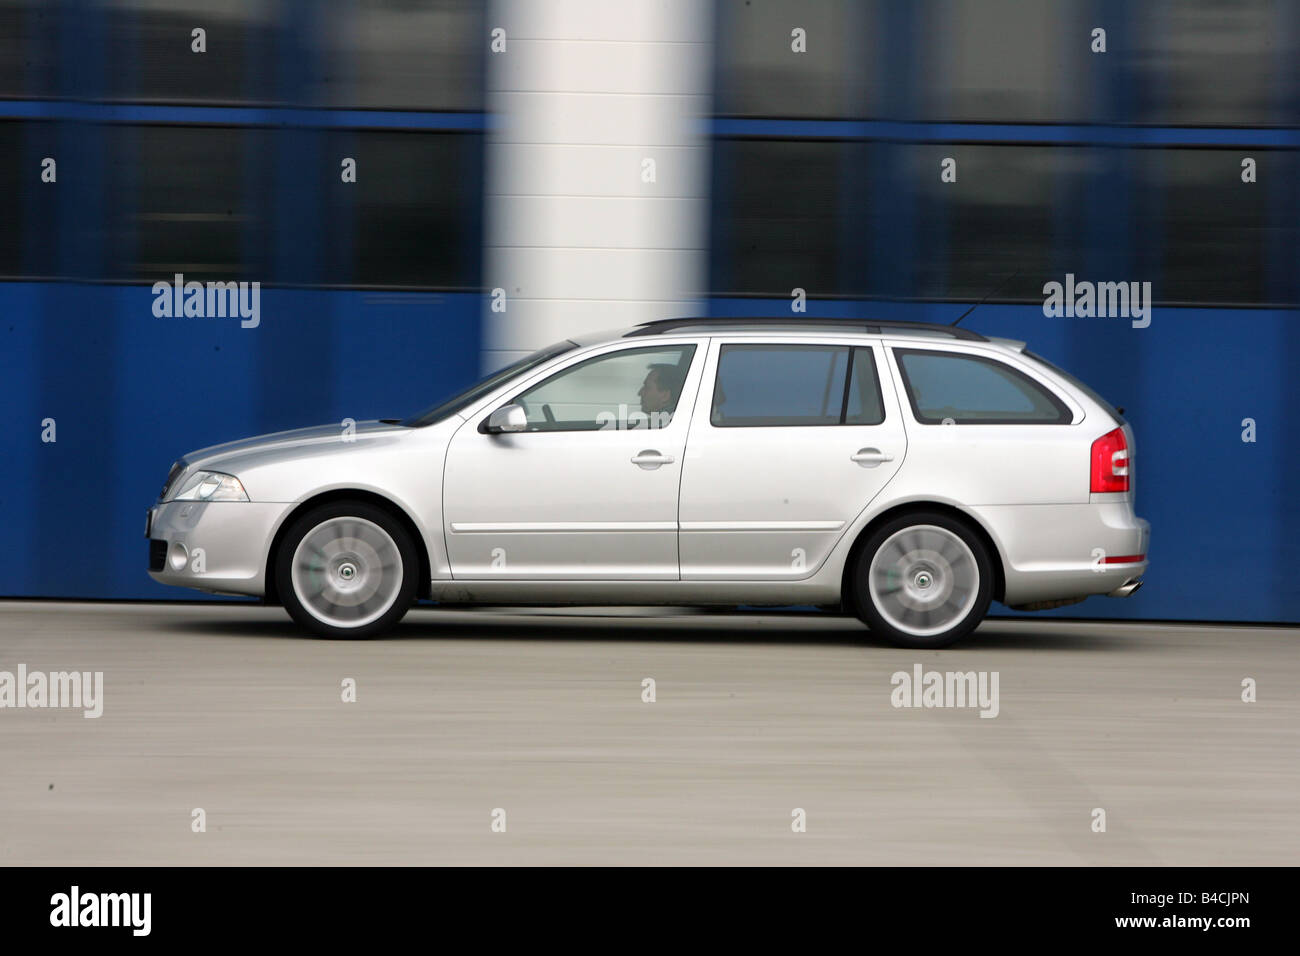 Skoda Octavia RS Combi, model year 2005-, silver, driving, side view, City Stock Photo